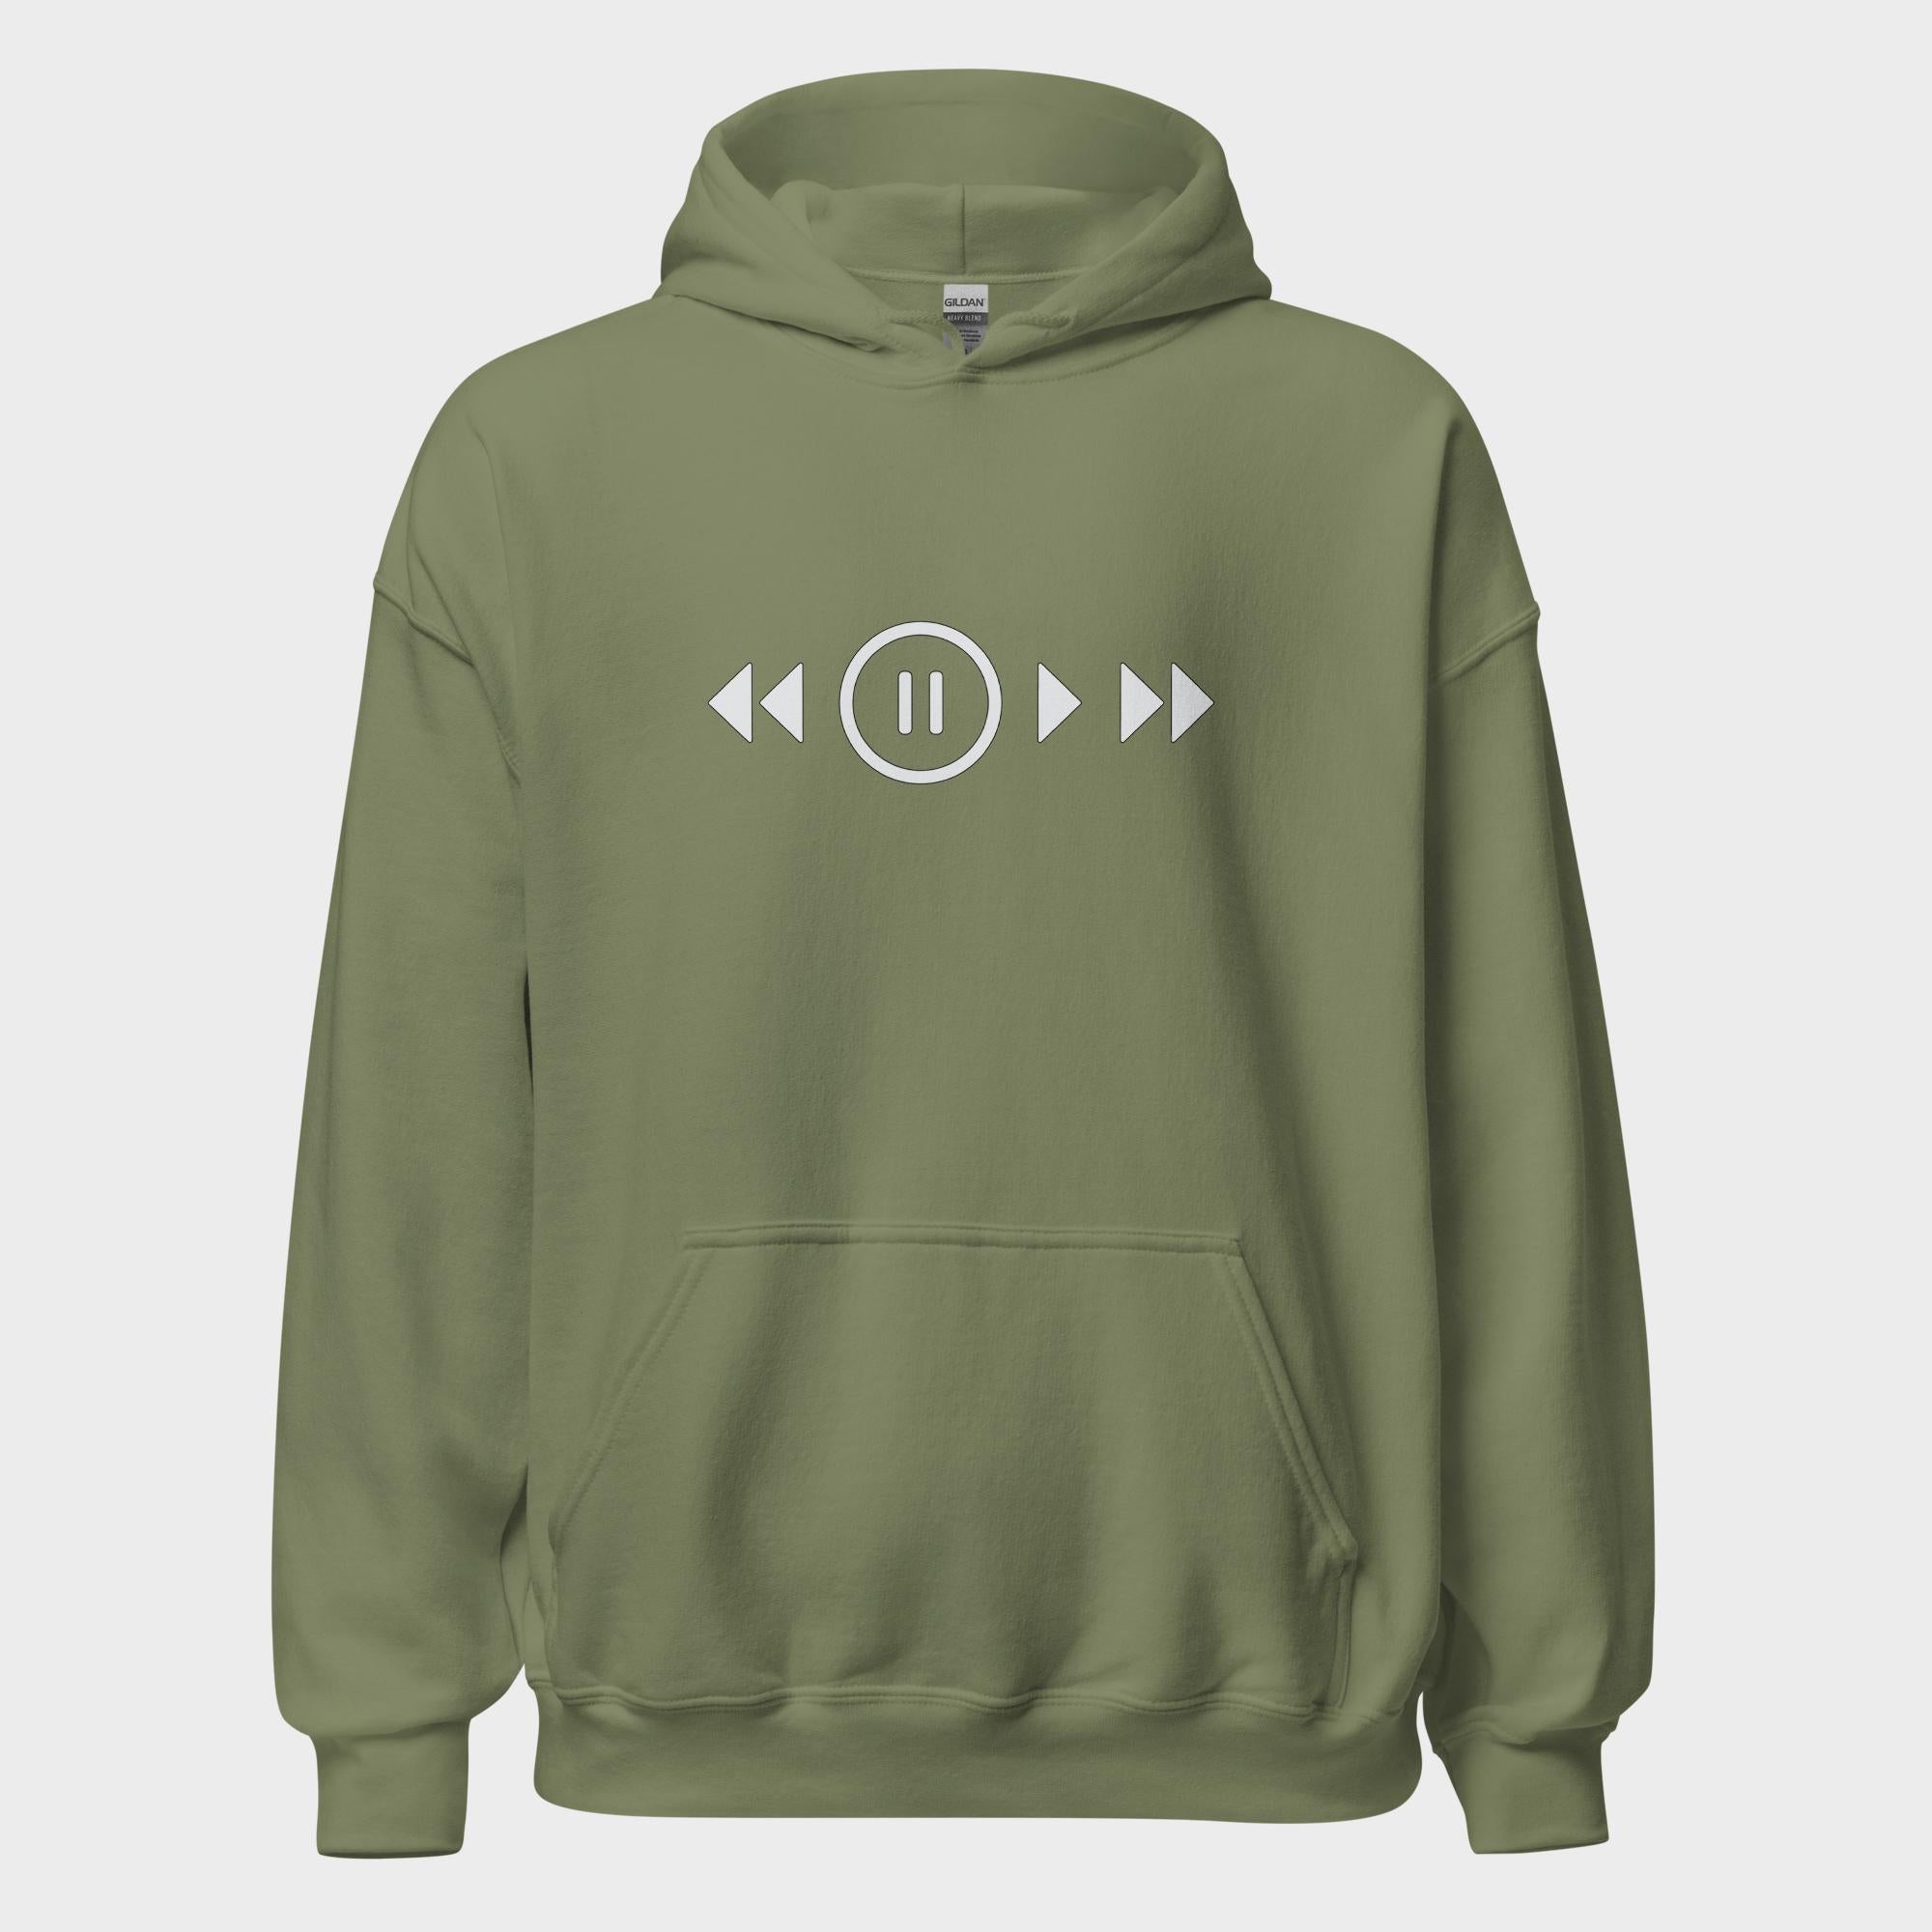 Don't Stop The Music - Hoodie